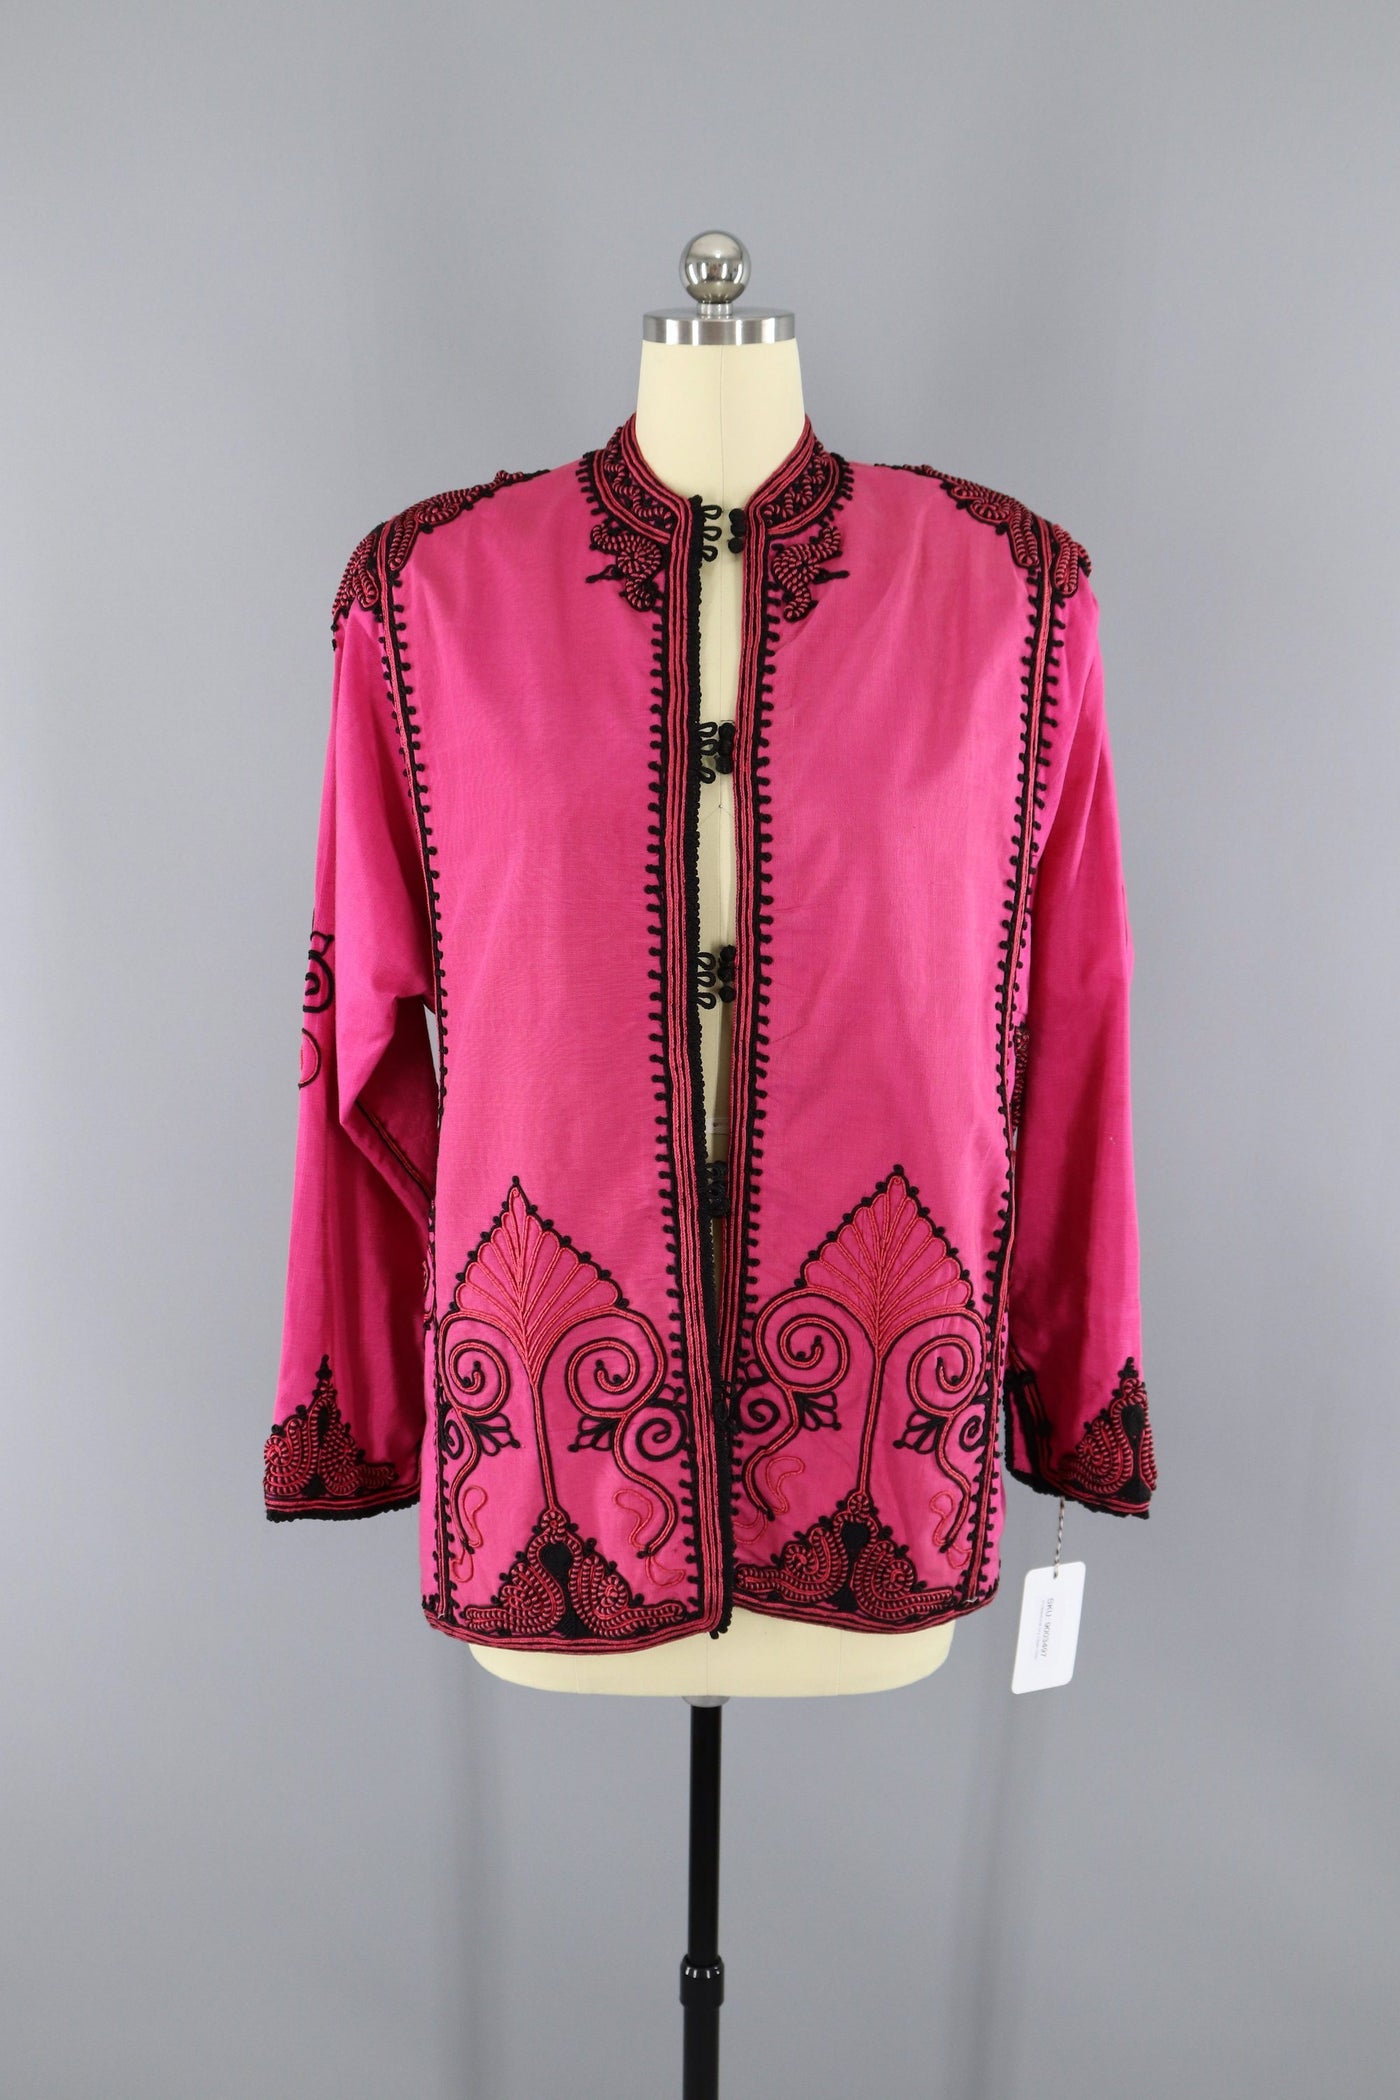 Vintage 1980s Pink Soutache Embroidered Jacket - ThisBlueBird